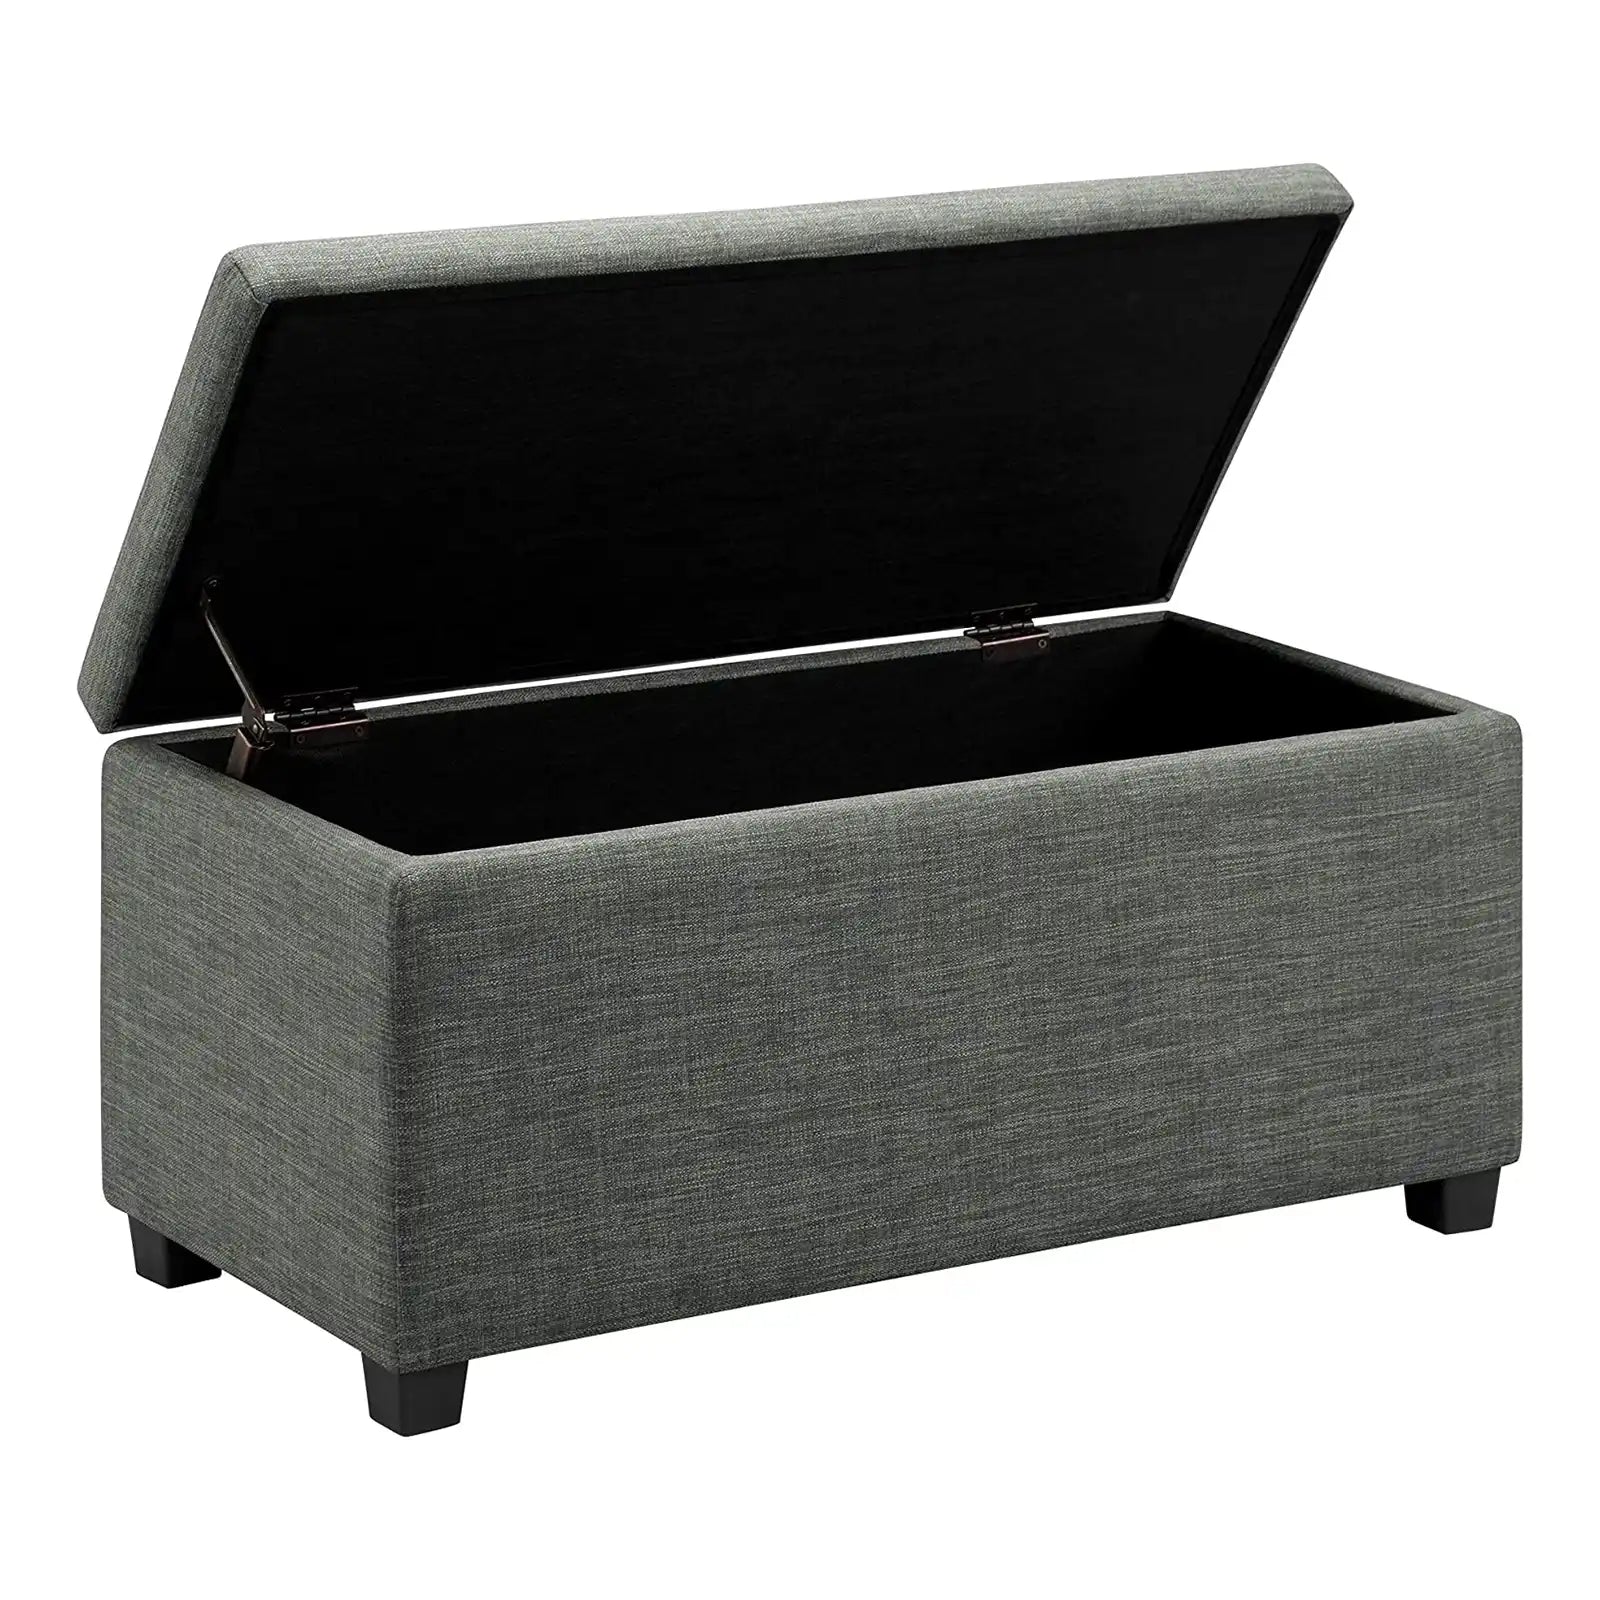 Upholstered Storage Ottoman and Entryway Bench